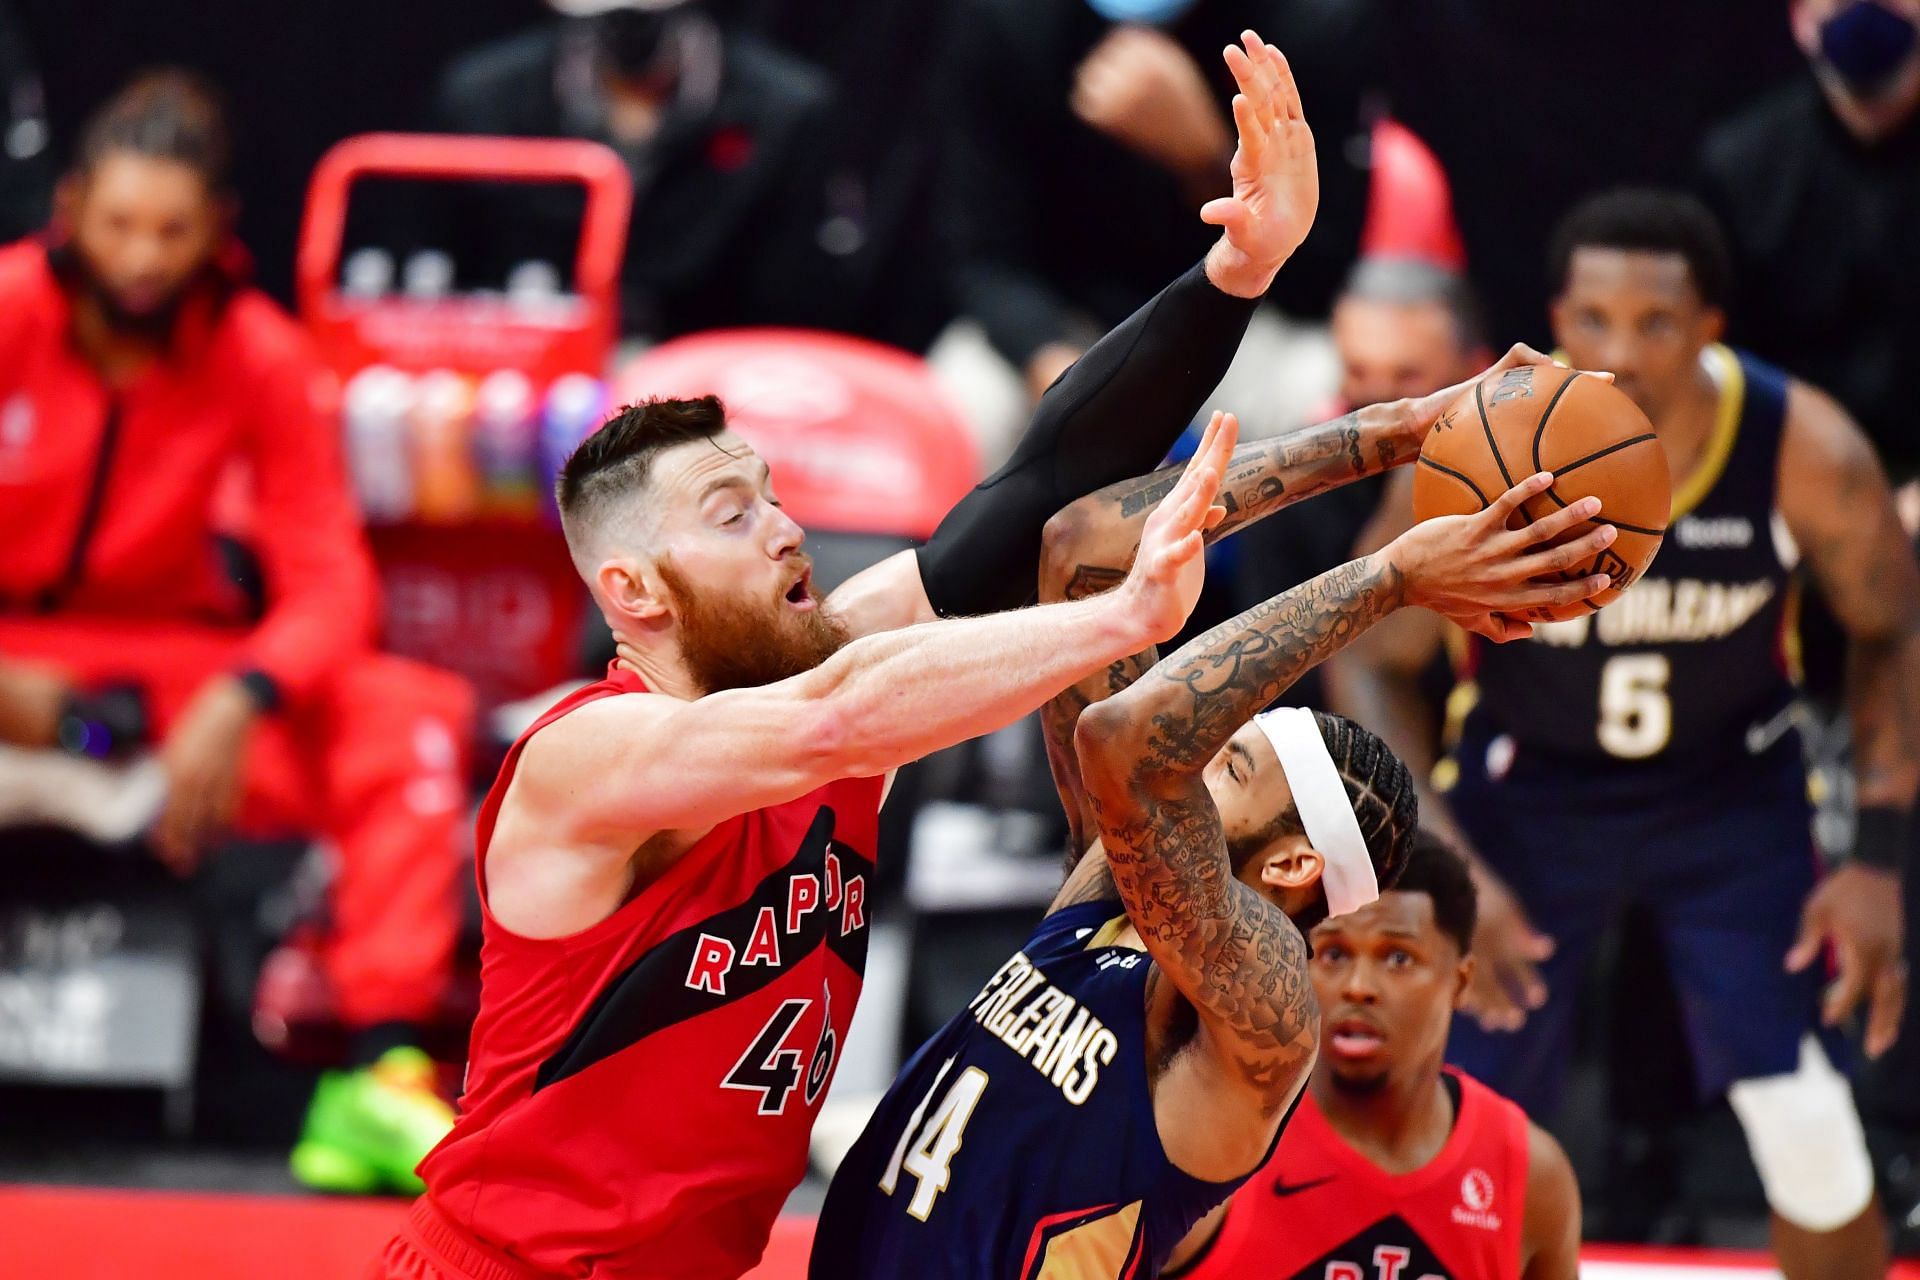 The New Orleans Pelicans will host the Toronto Raptors on February 14.